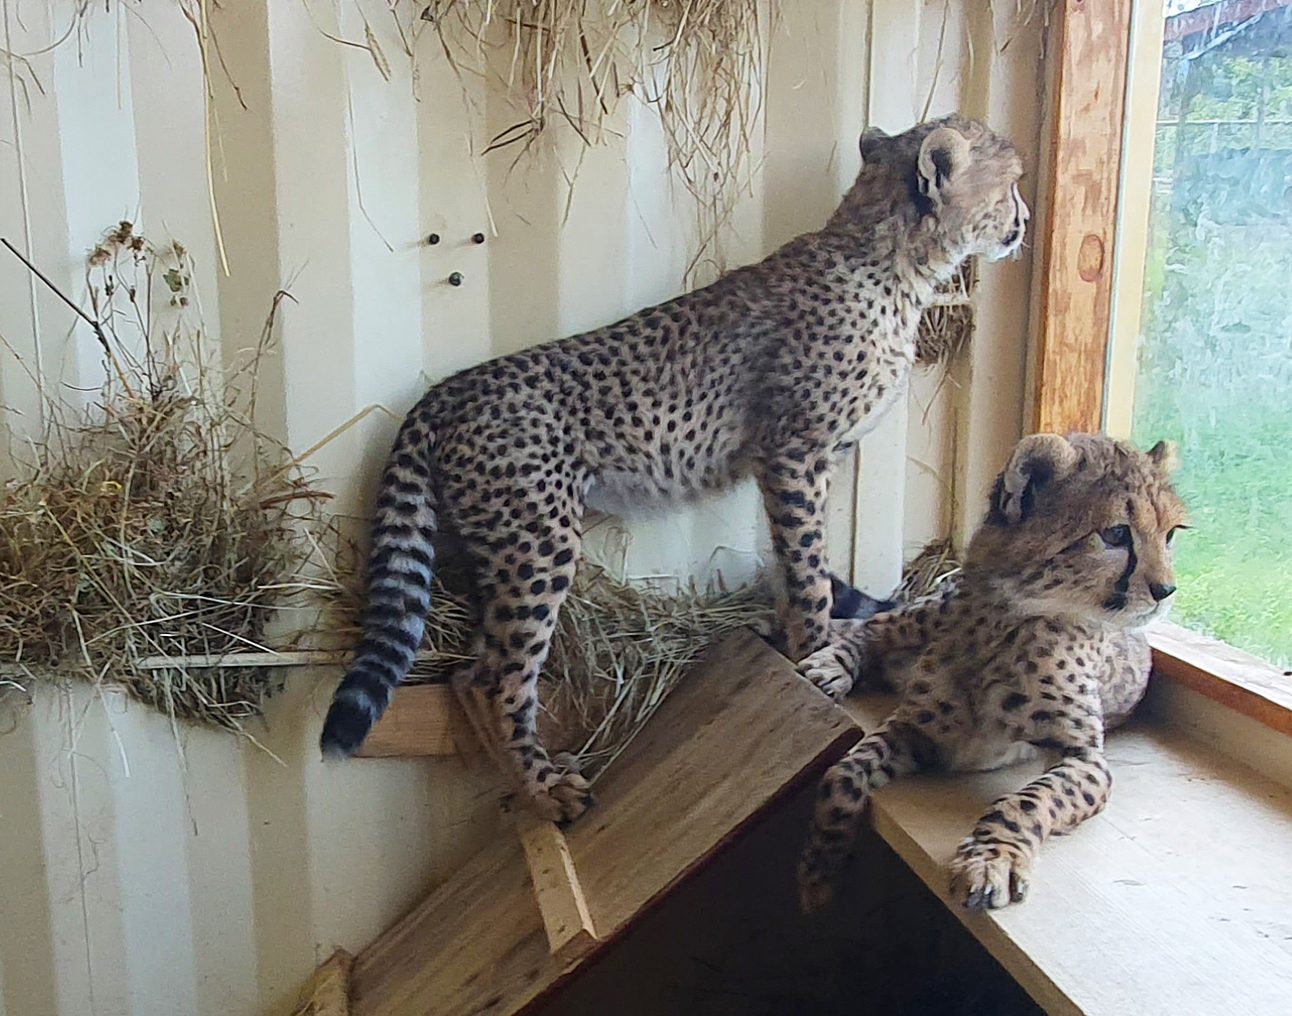 Two young cheetah standing on a wooden platform and looking out a window